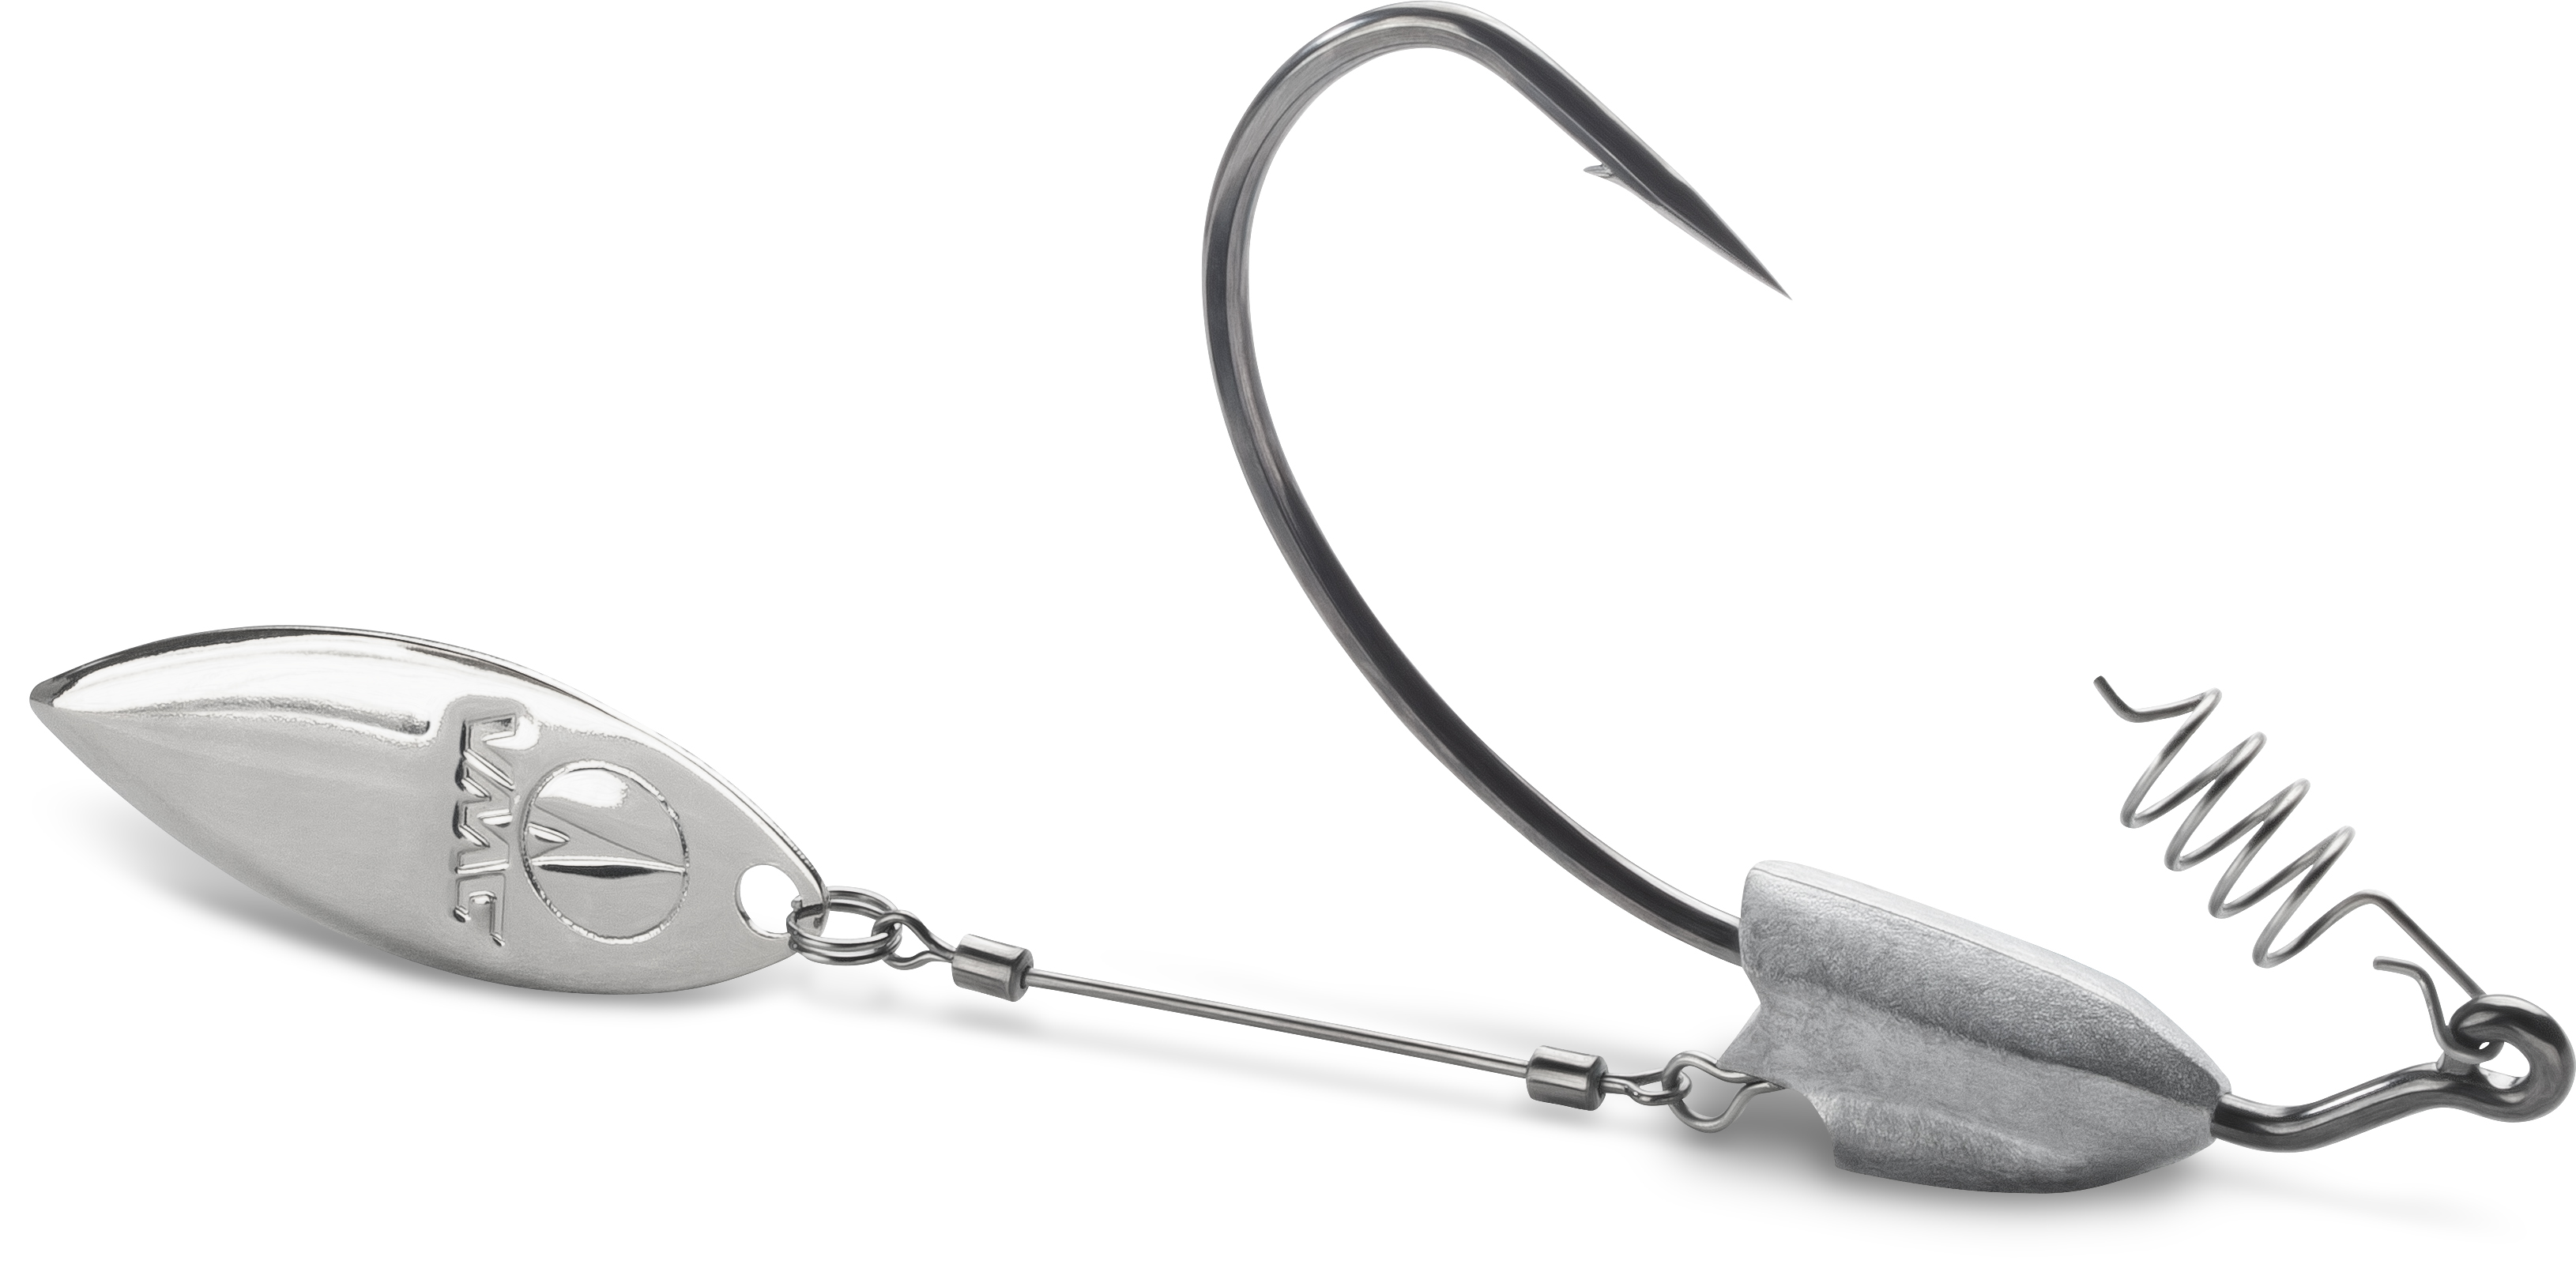 ICAST 2019: VMC Heavy Duty Weighted Willow Swimbait Hook - On The Water